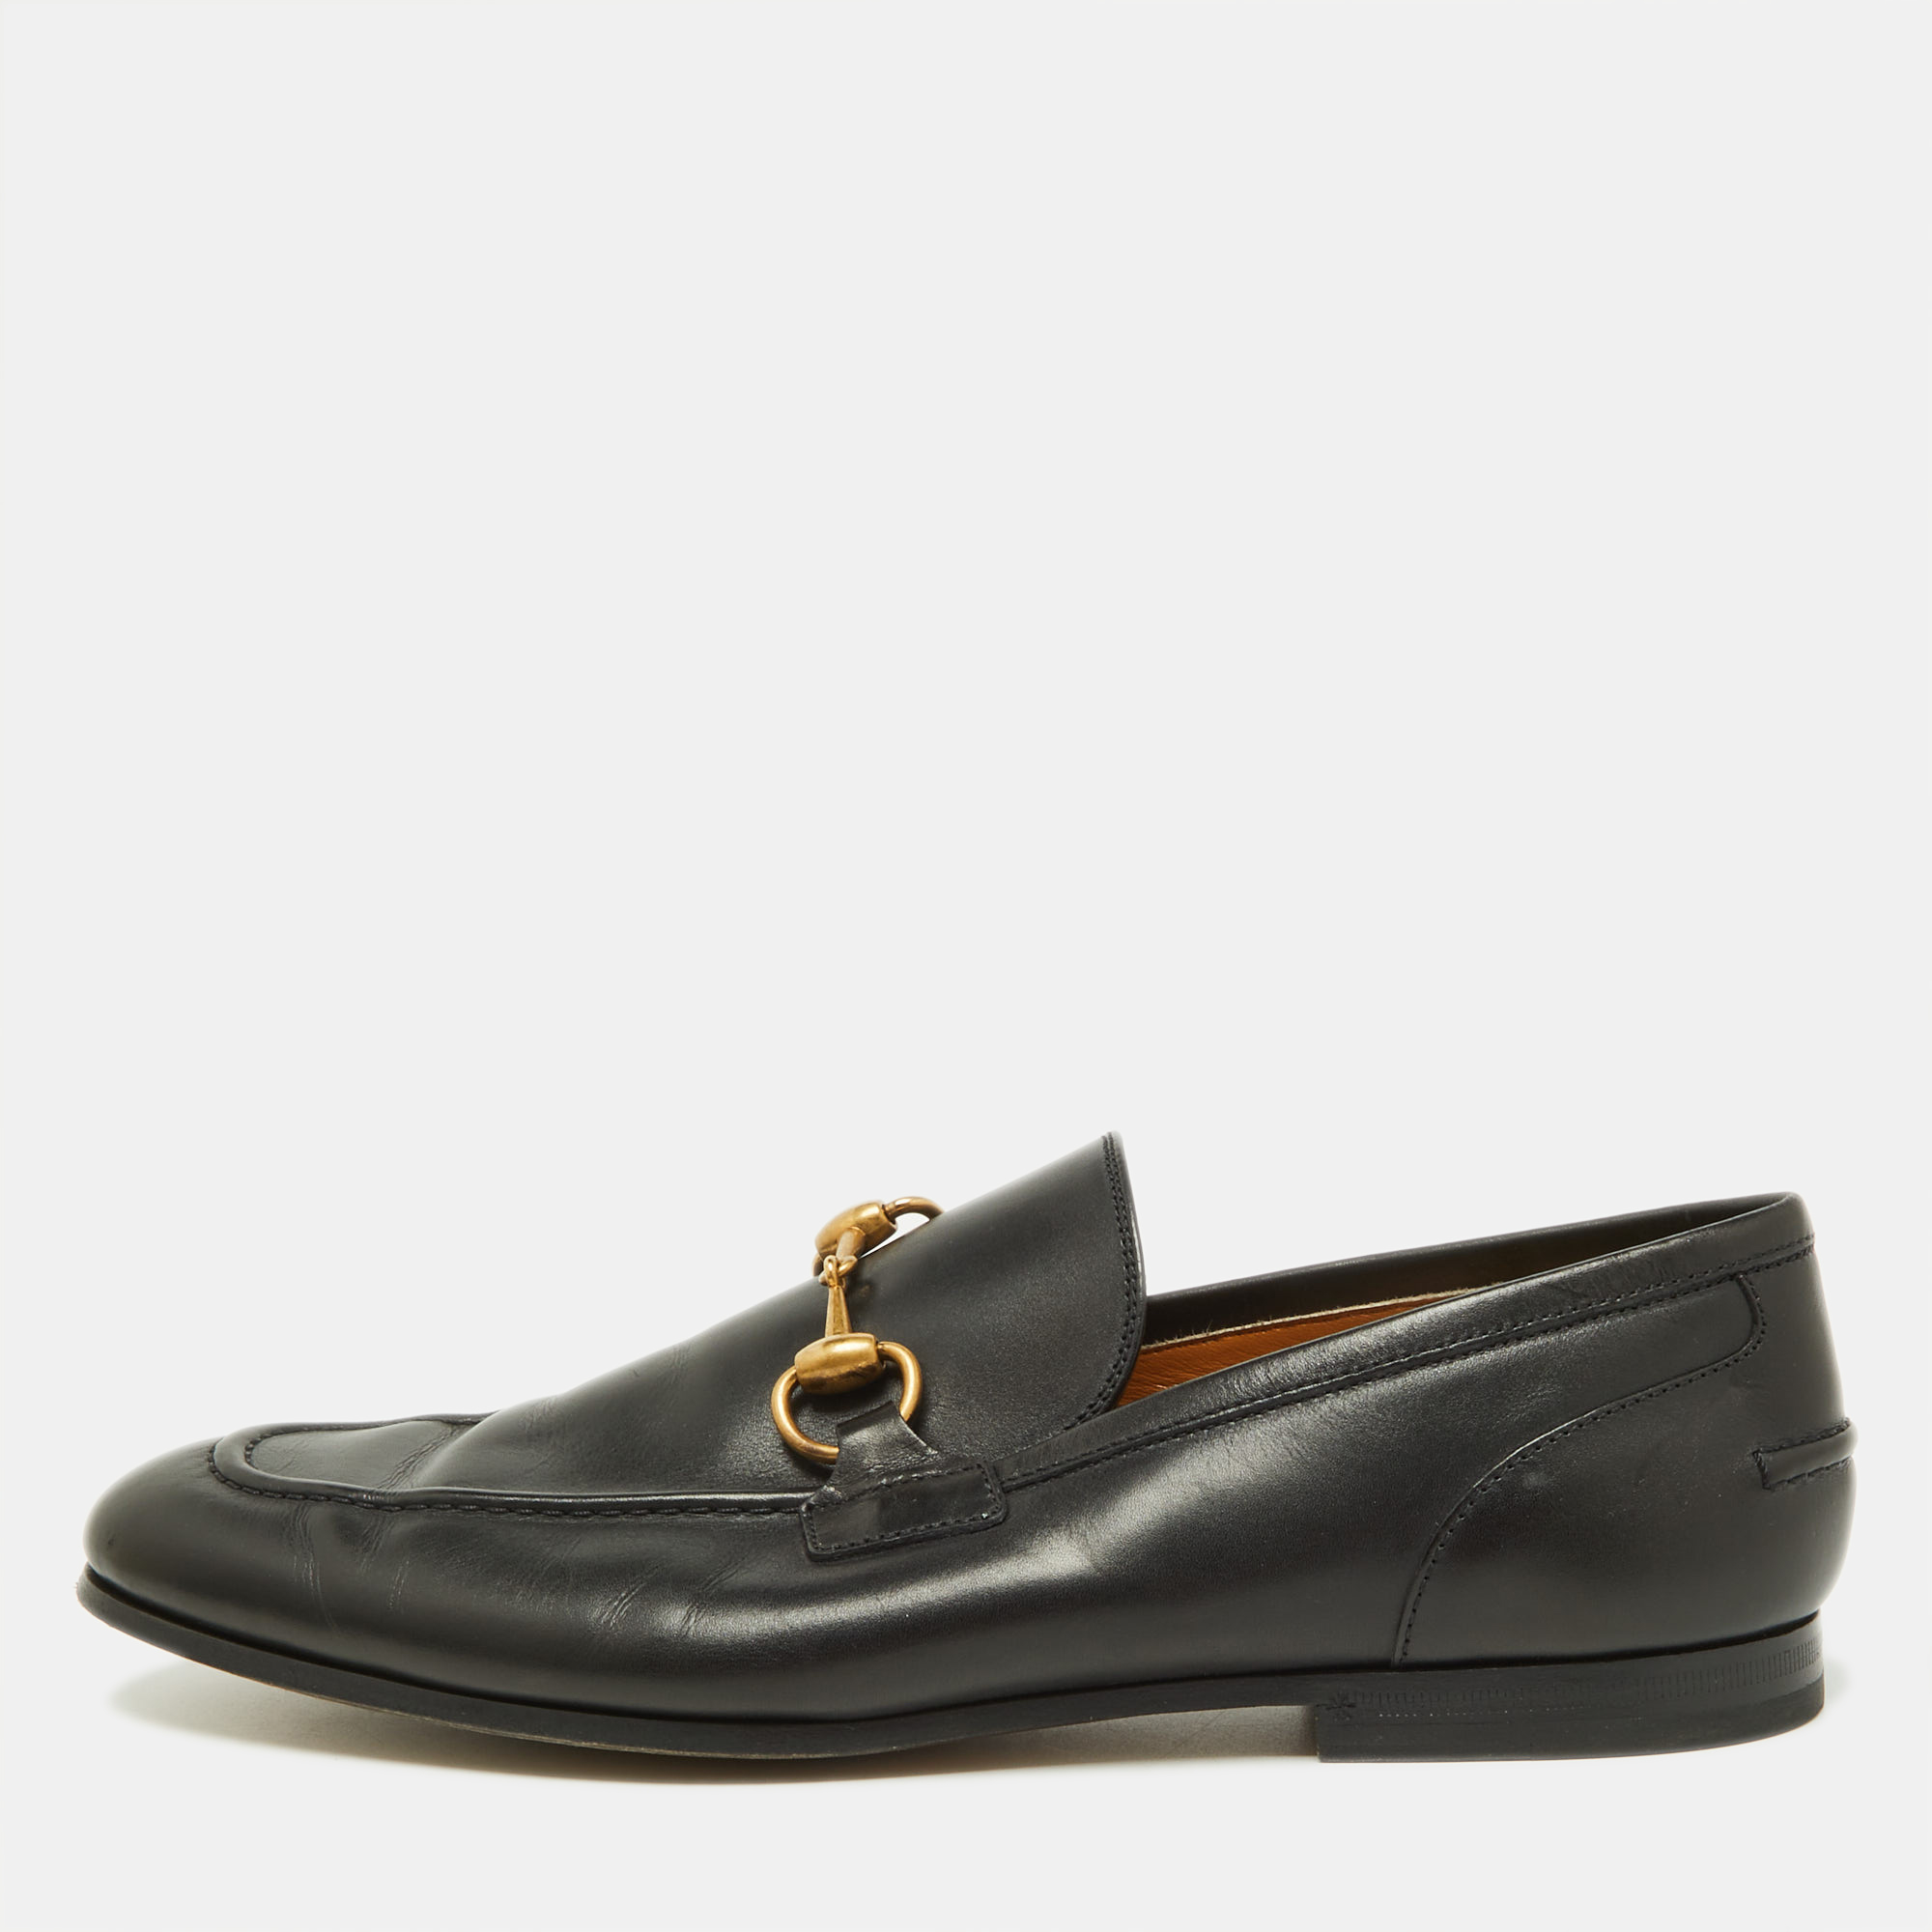 Pre-owned Gucci Black Leather Jordaan Loafers Size 40